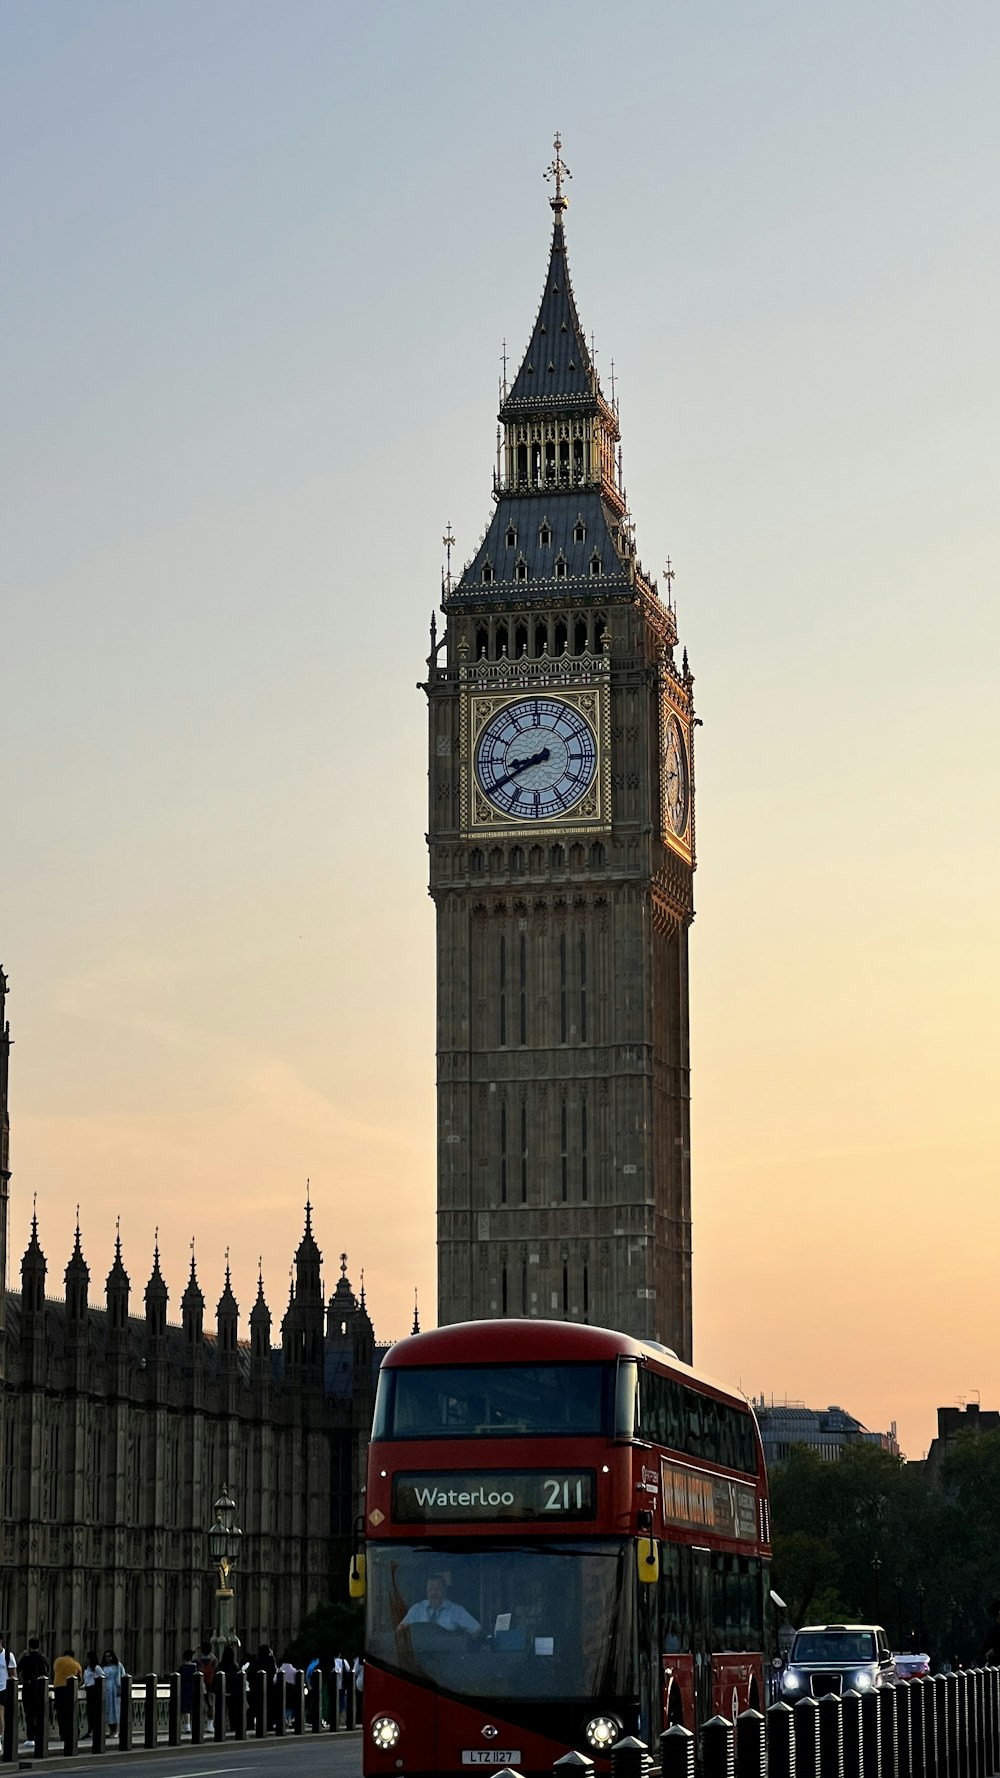 a red double decker bus driving past a tall clock tower